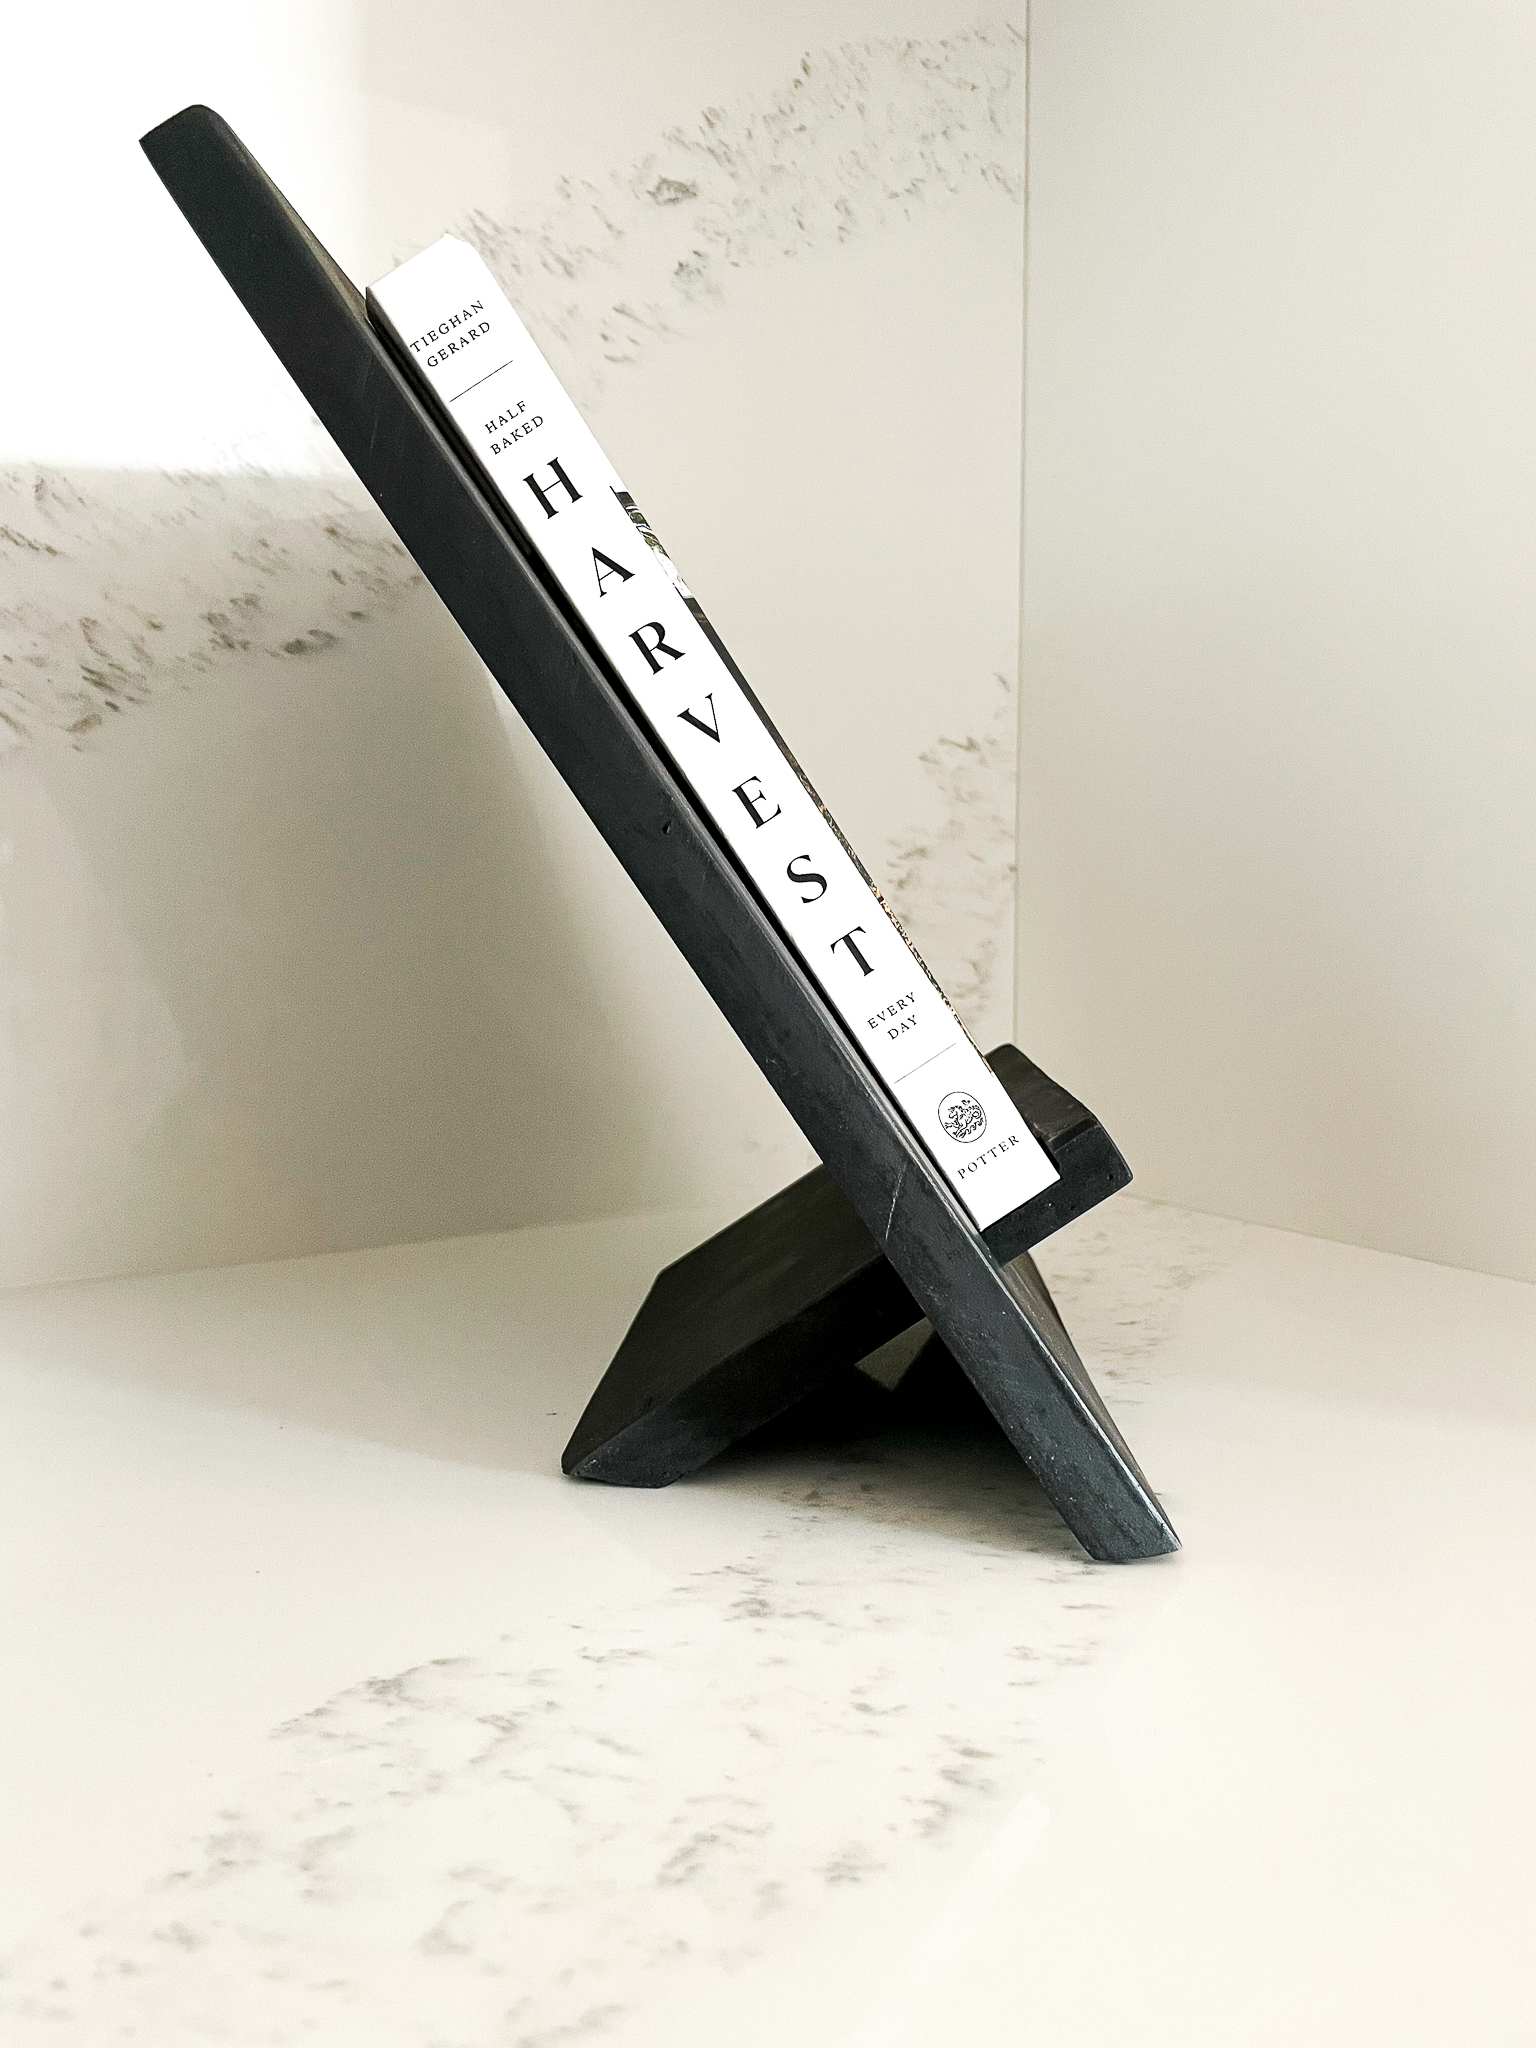 A DIY cookbook holder shown from the side